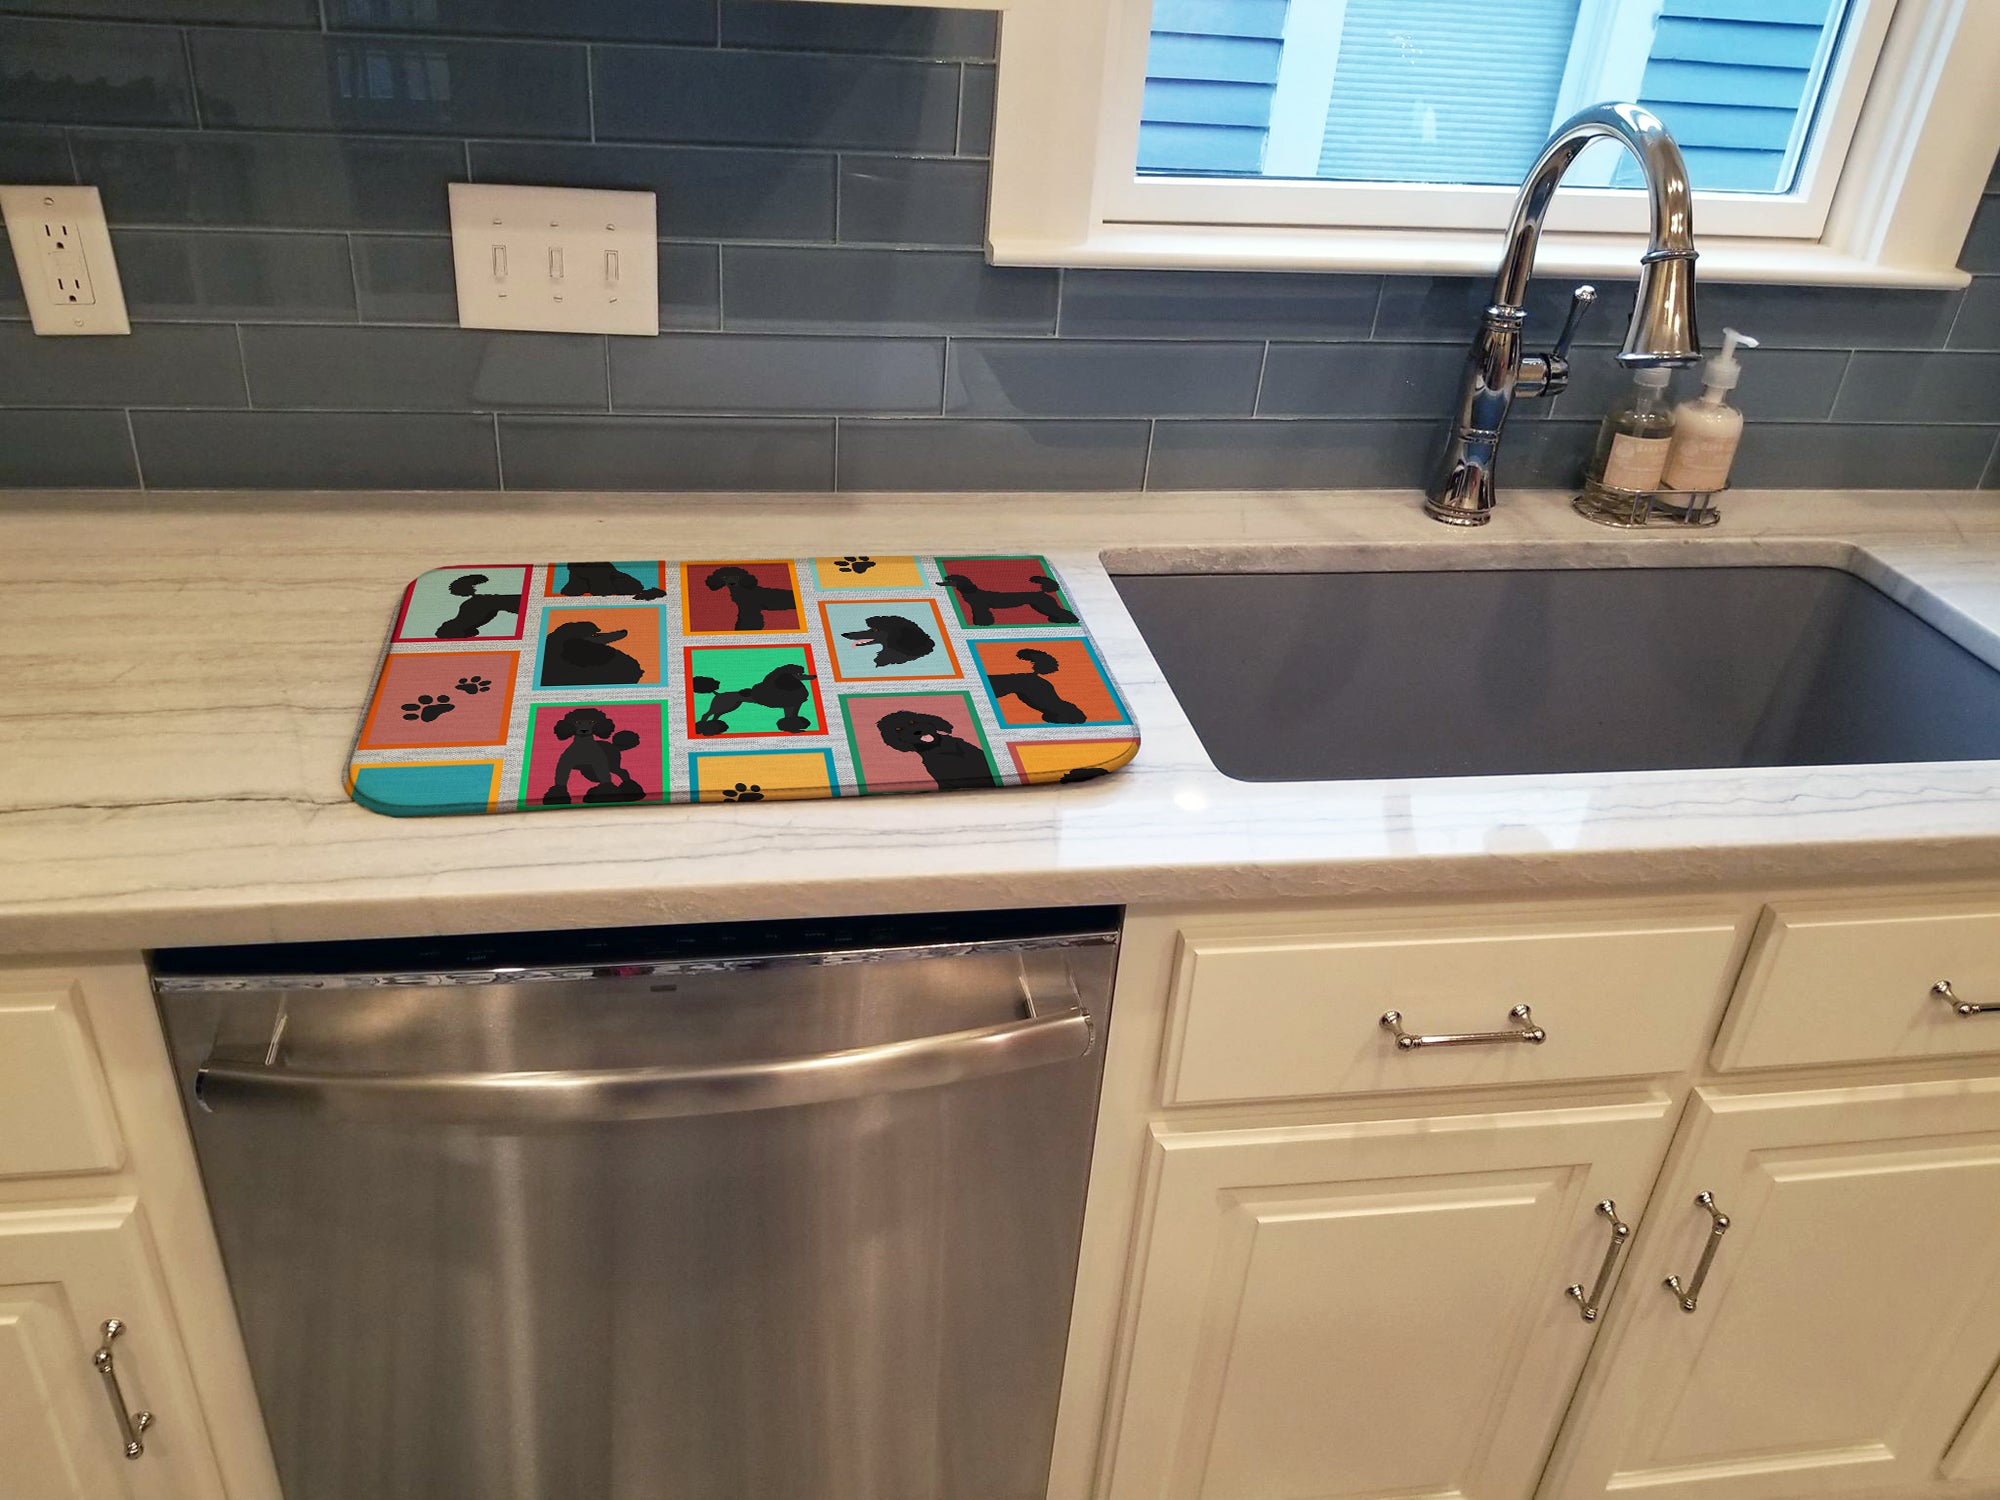 Lots of Black Standard Poodle Dish Drying Mat